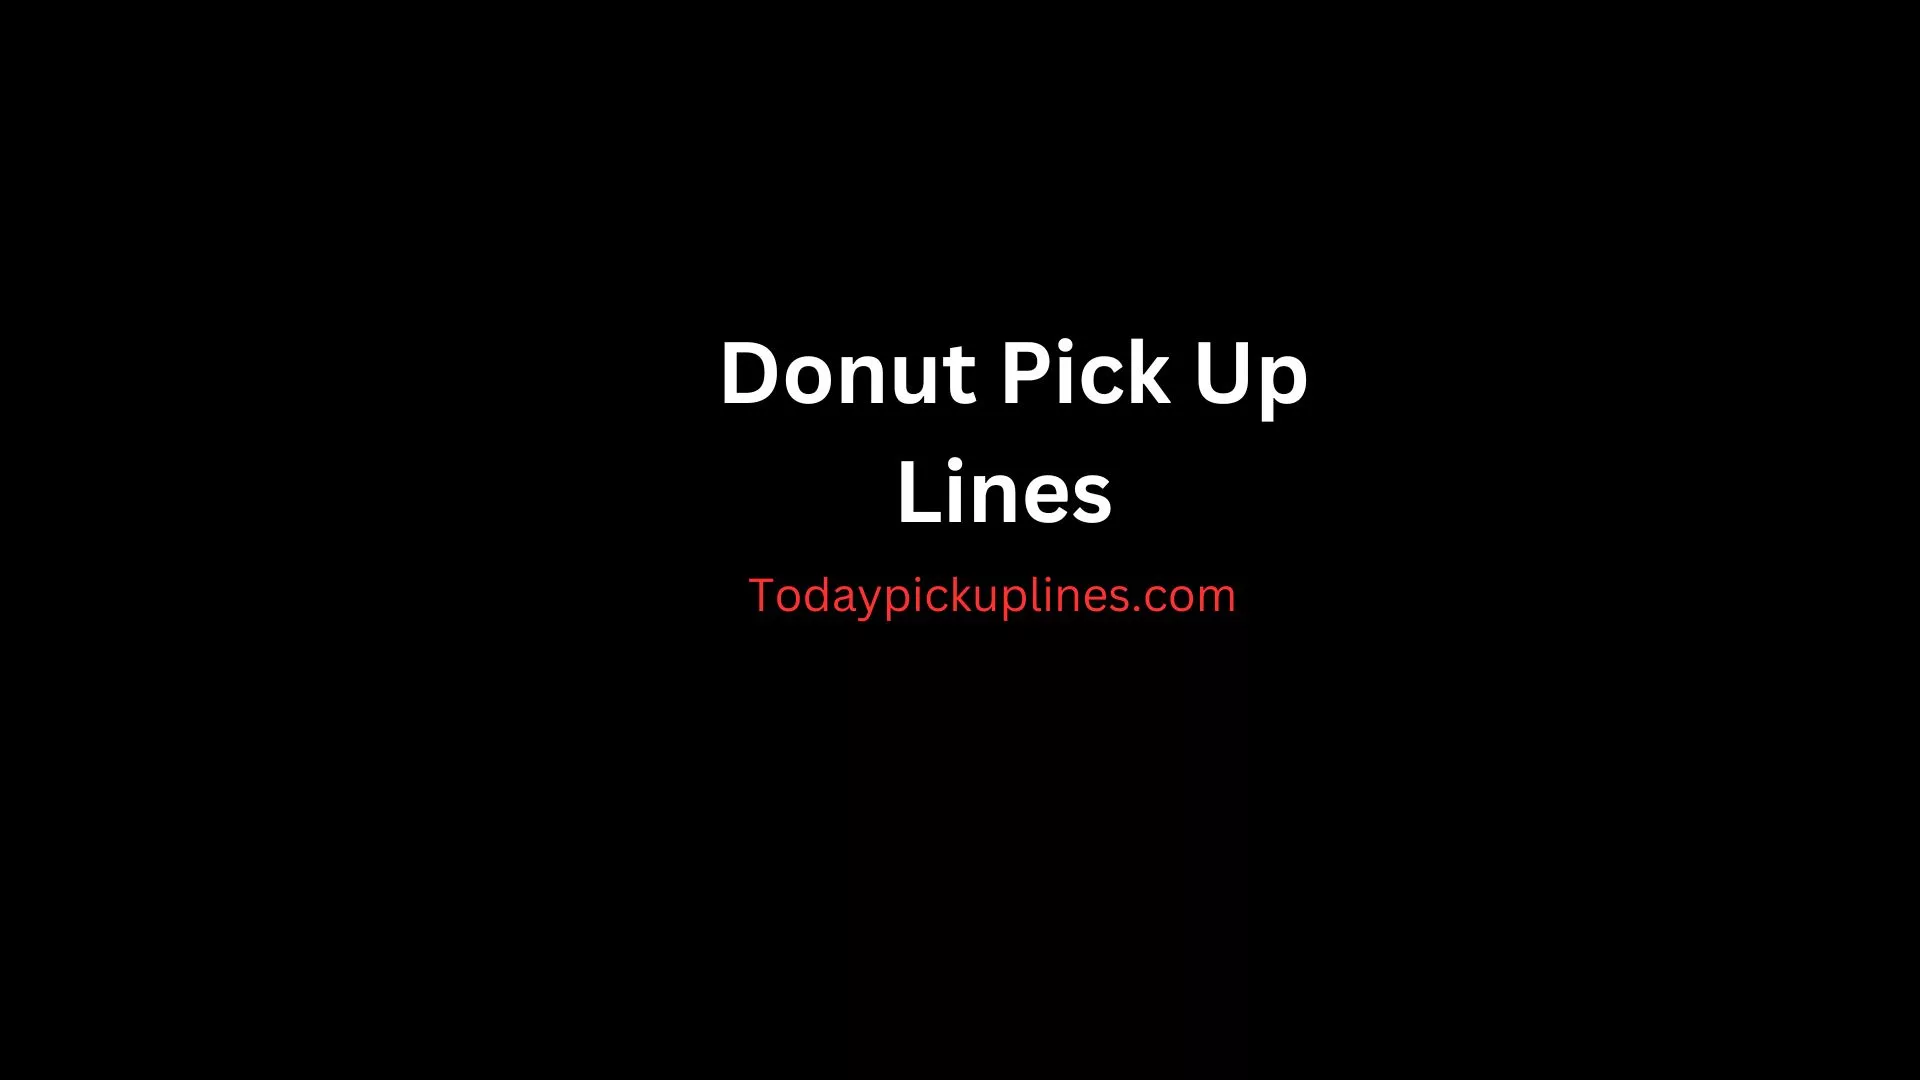 Donut Pick Up Lines